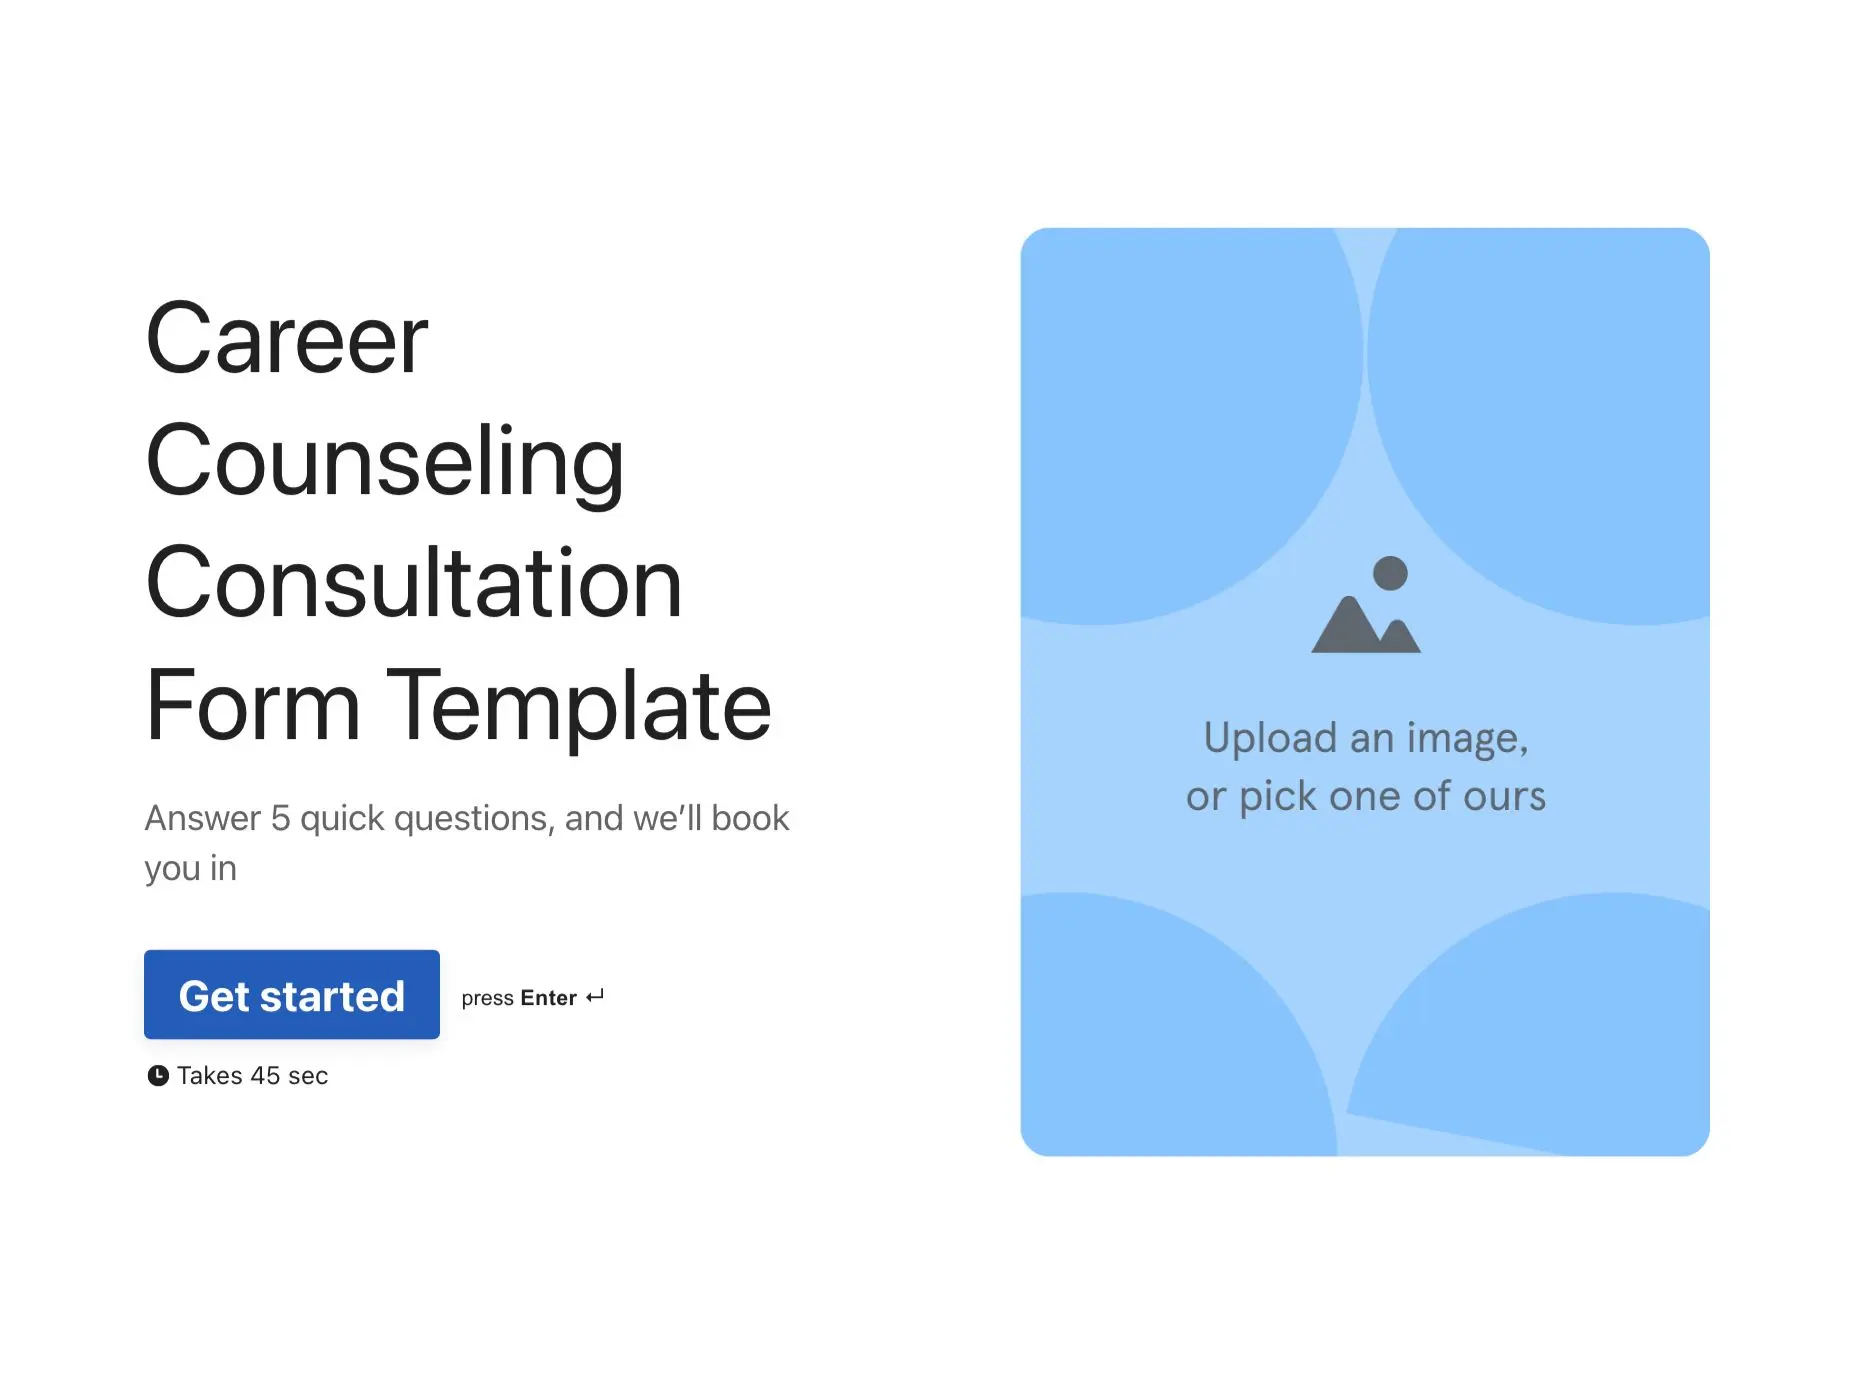 Career Counseling Consultation Form Template Hero